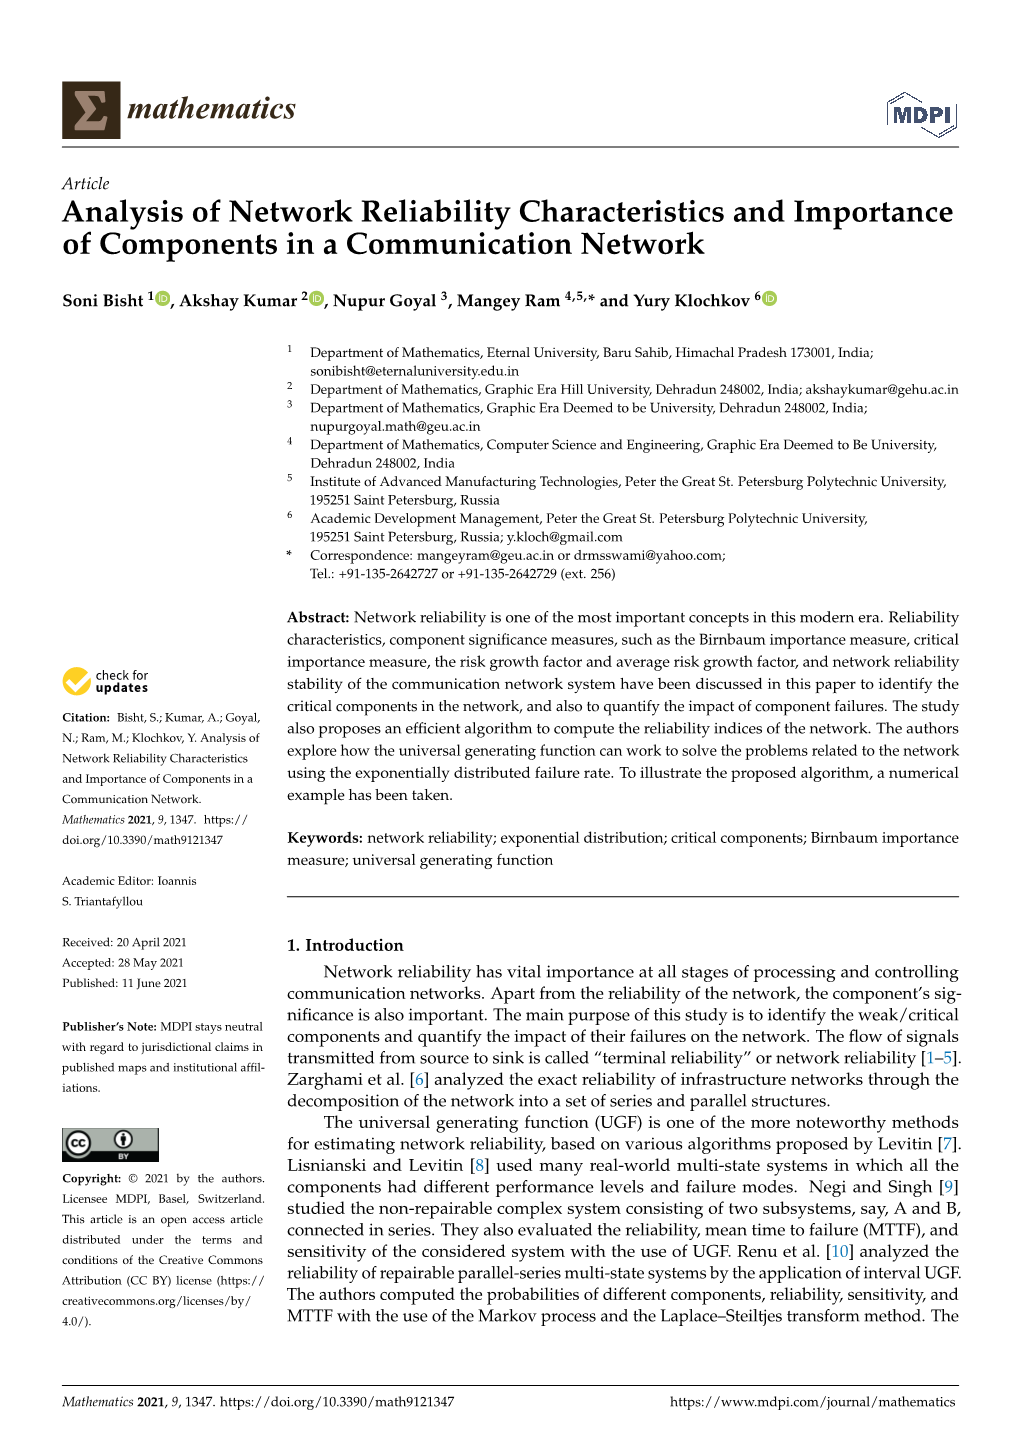 Analysis of Network Reliability Characteristics and Importance of Components in a Communication Network